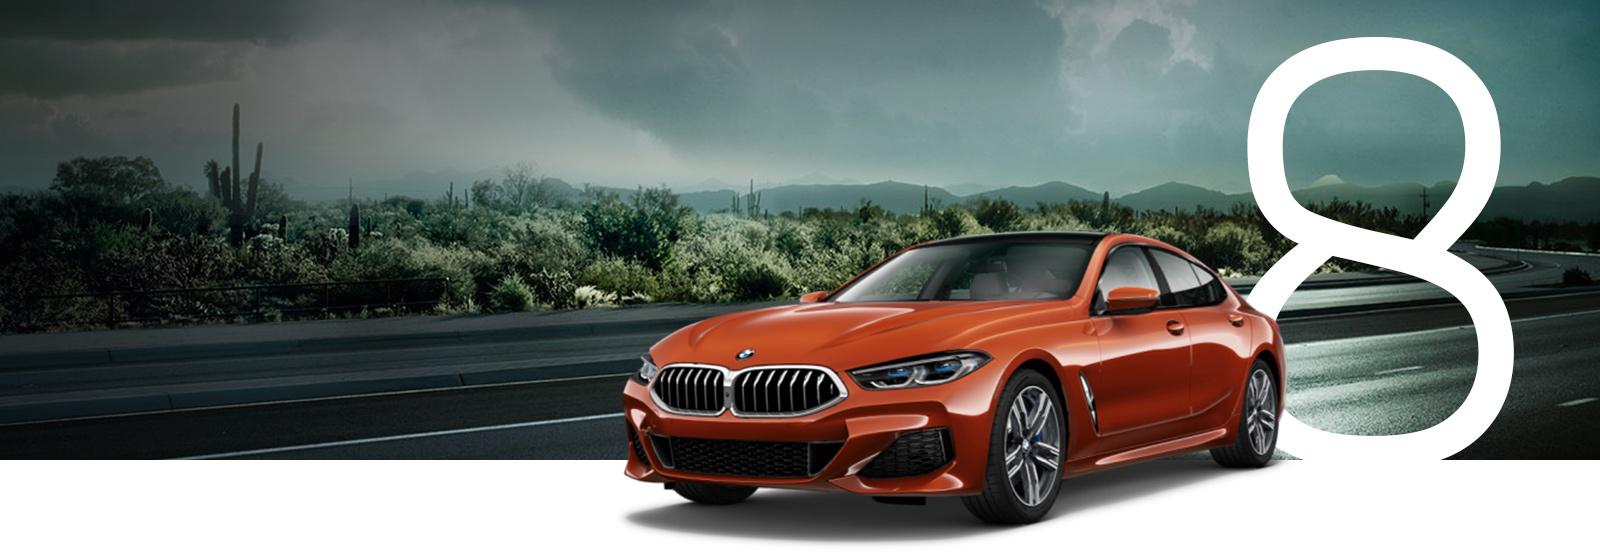 An orange BMW 8 Series driving on a stormy desert road.